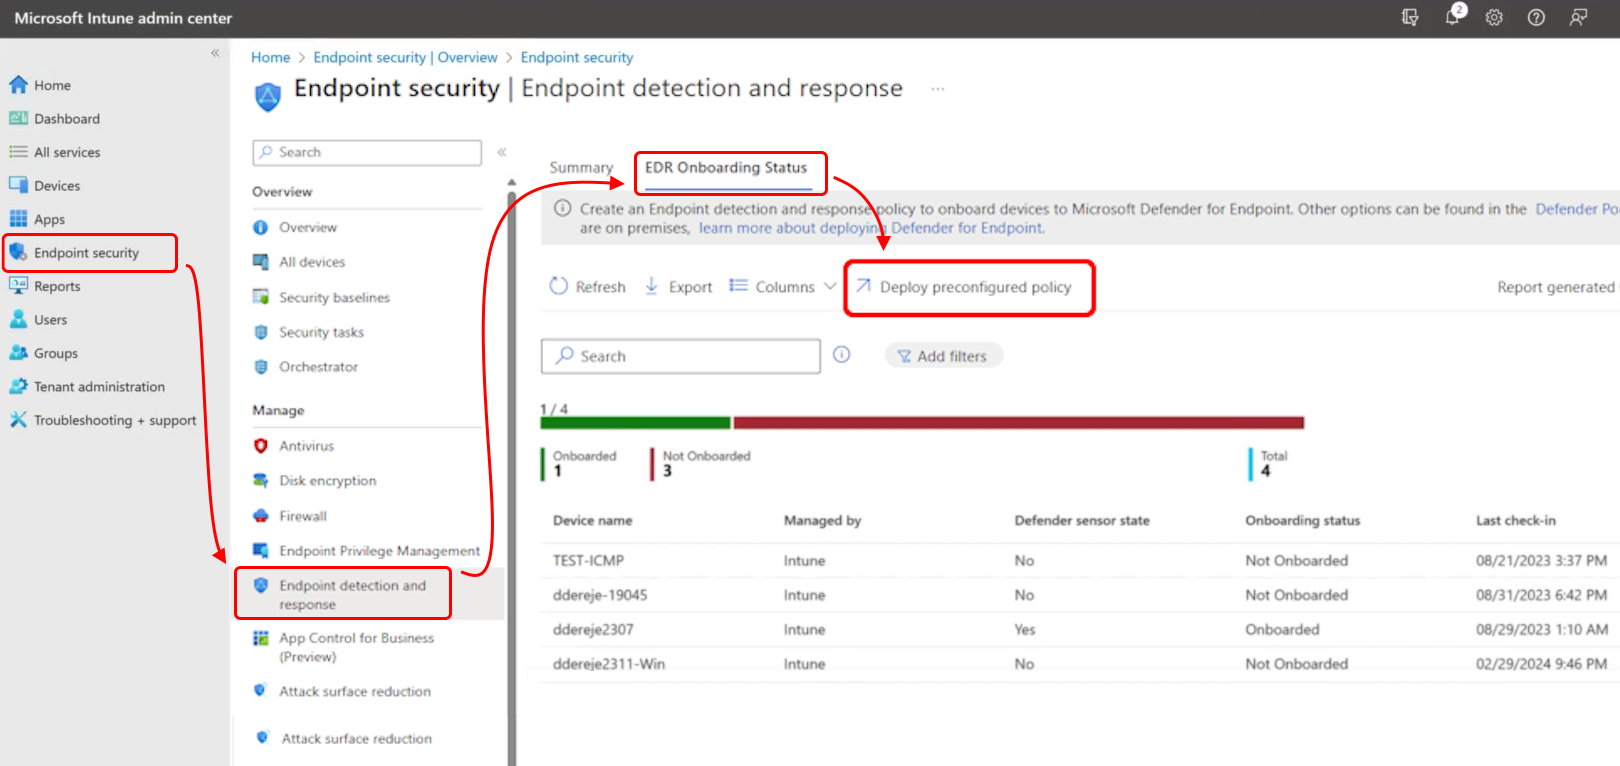 Screen shot of the admin center that shows where to find the Deploy preconfigured policy option.